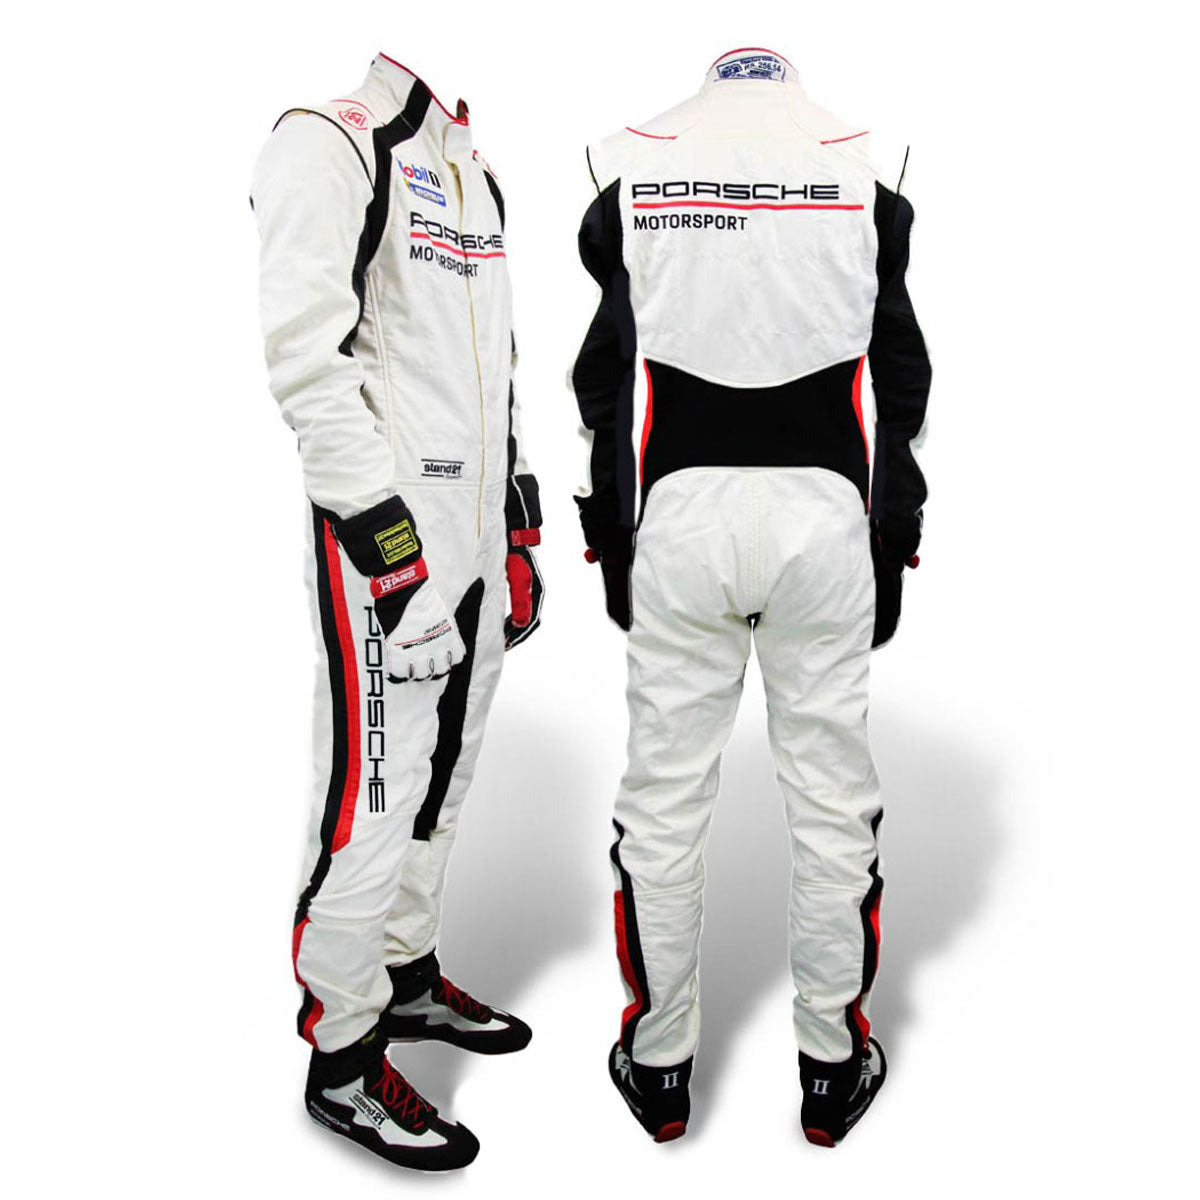 Stand 21 Porsche Motorsport Suit lowest prices wen on sale and the biggest discounts for the best deal